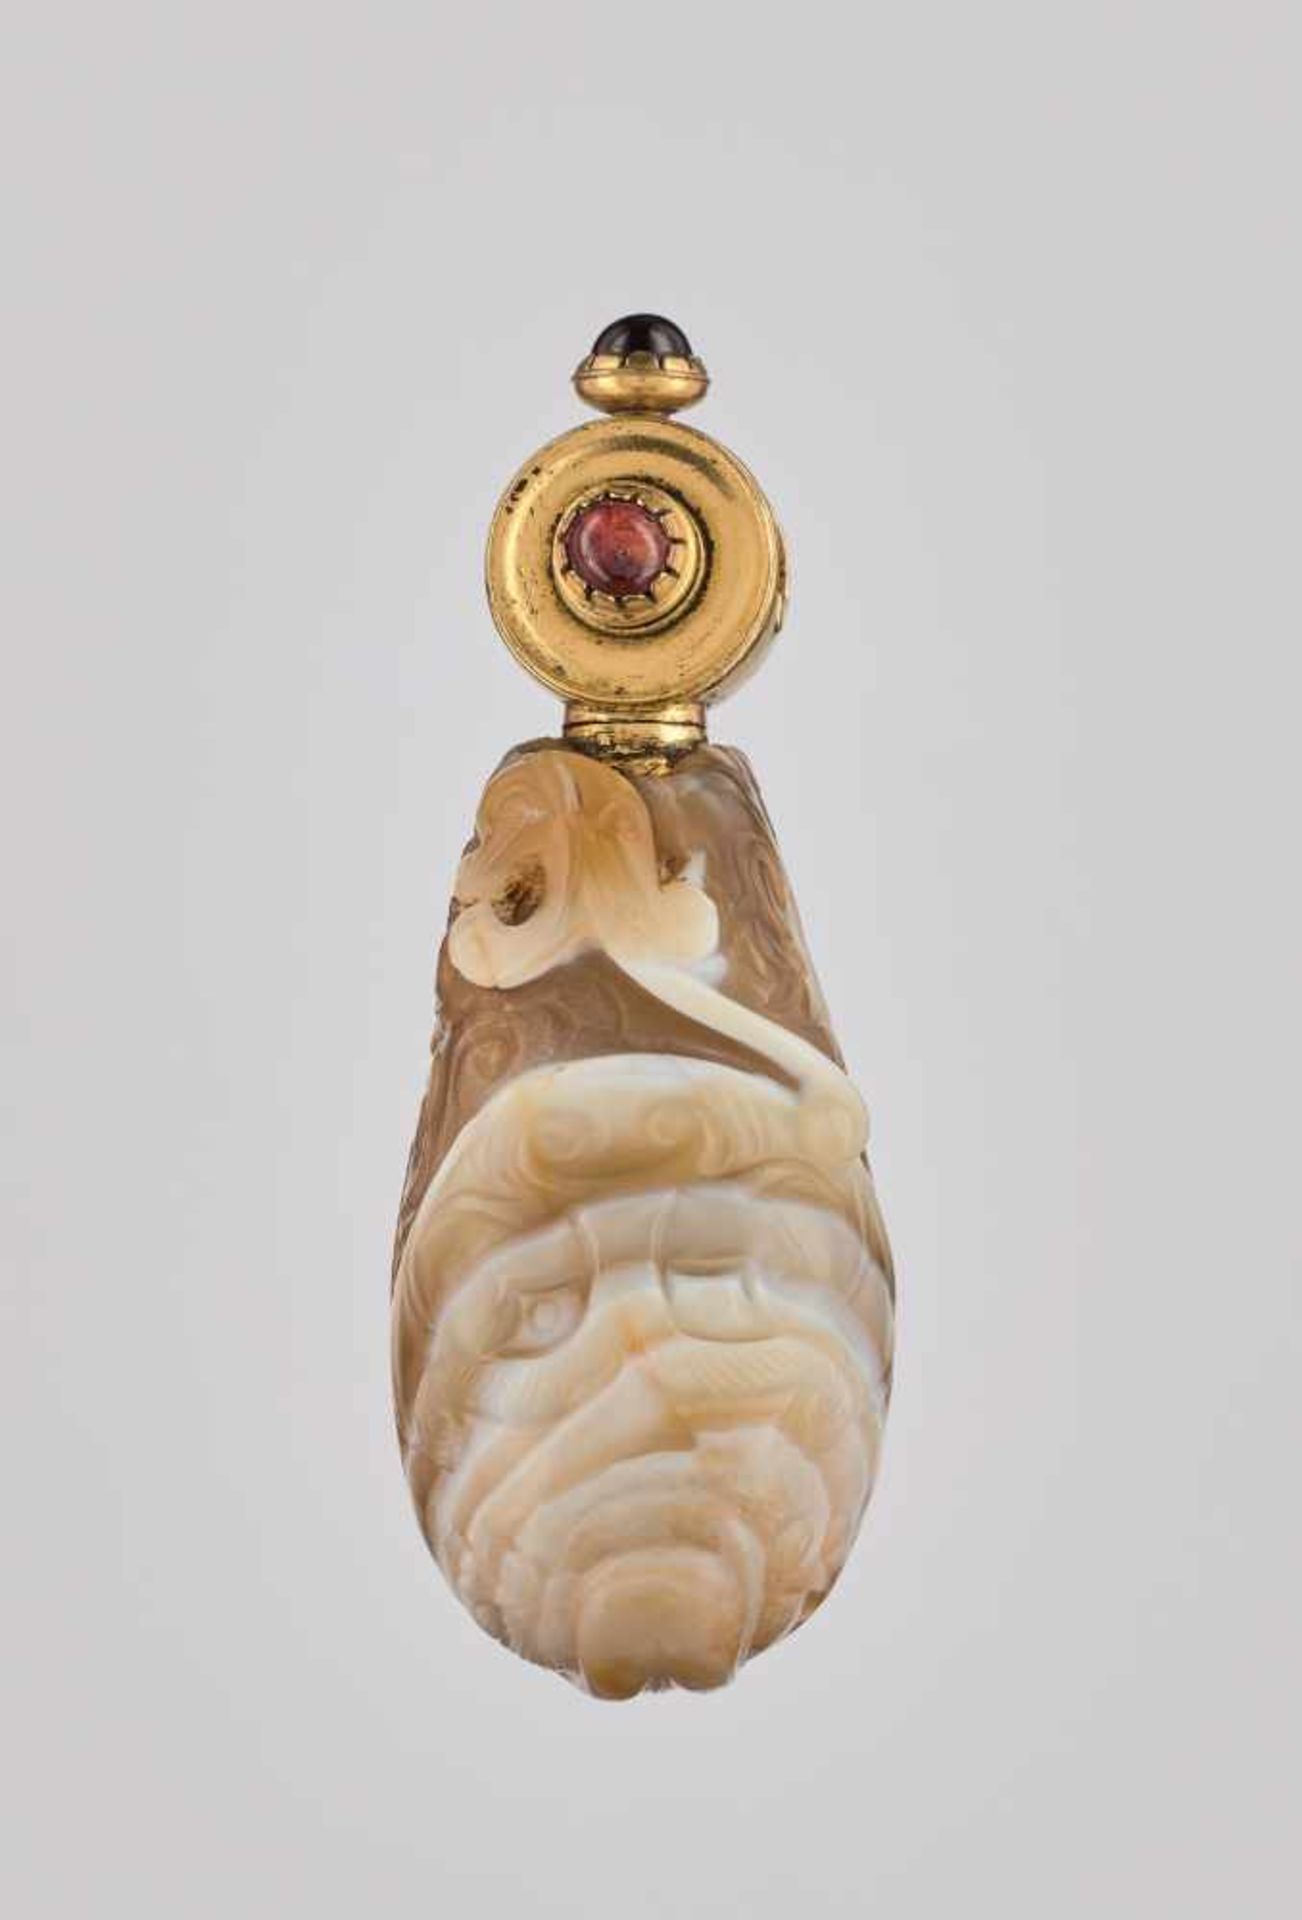 AN UNUSUAL, POSSIBLY IMPERIAL BANDED AGATE 'CHILONG' SNUFF BOTTLE, QING DYNASTY, 1770-1900 Banded